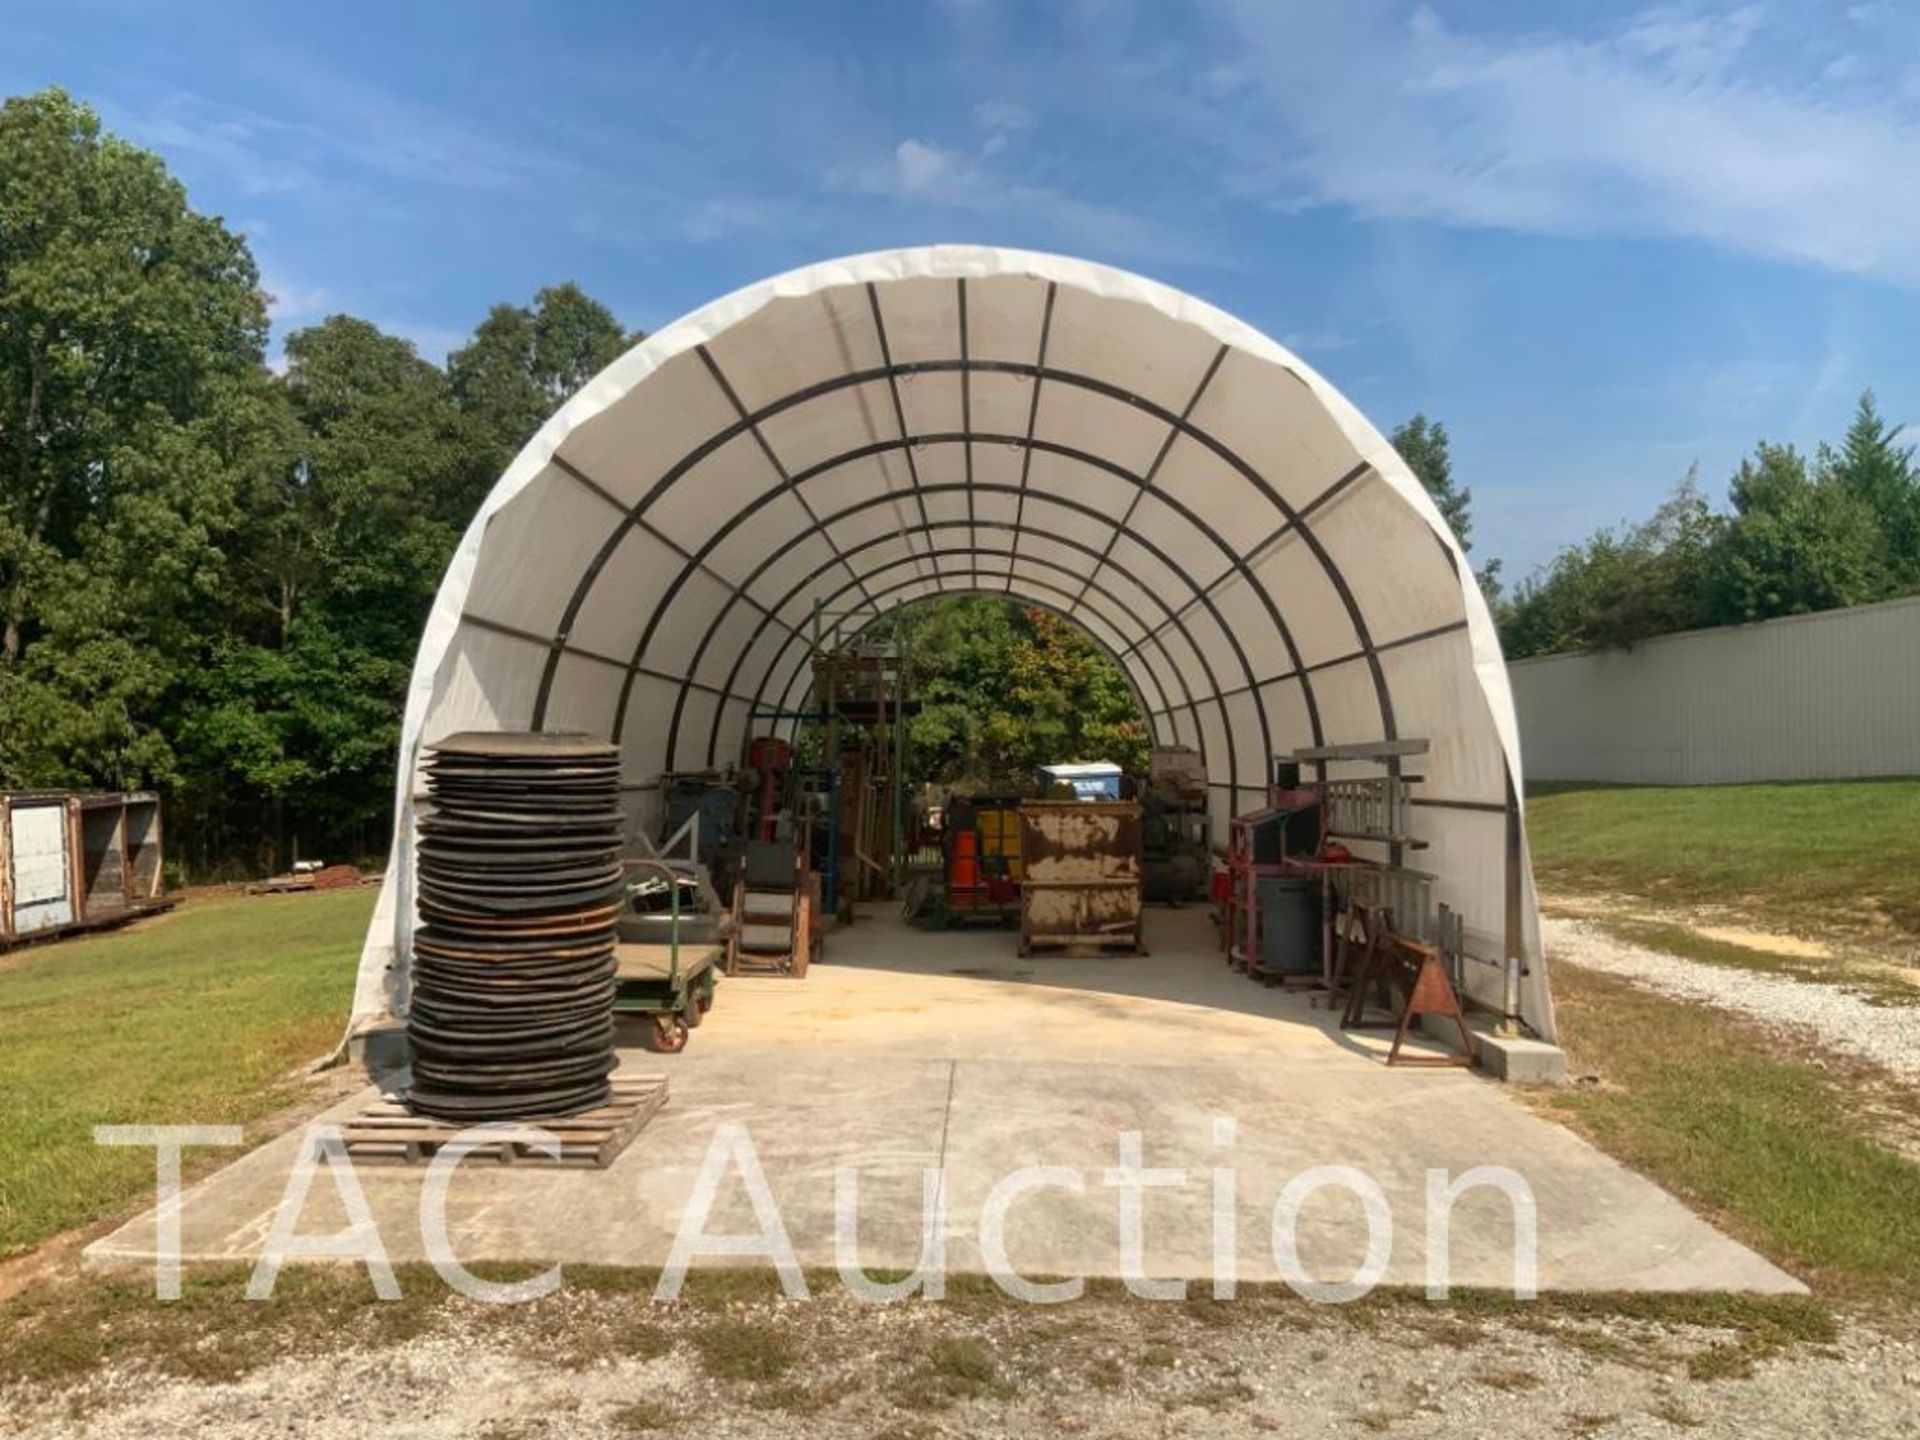 54ft Long Military Shelter - Image 6 of 17